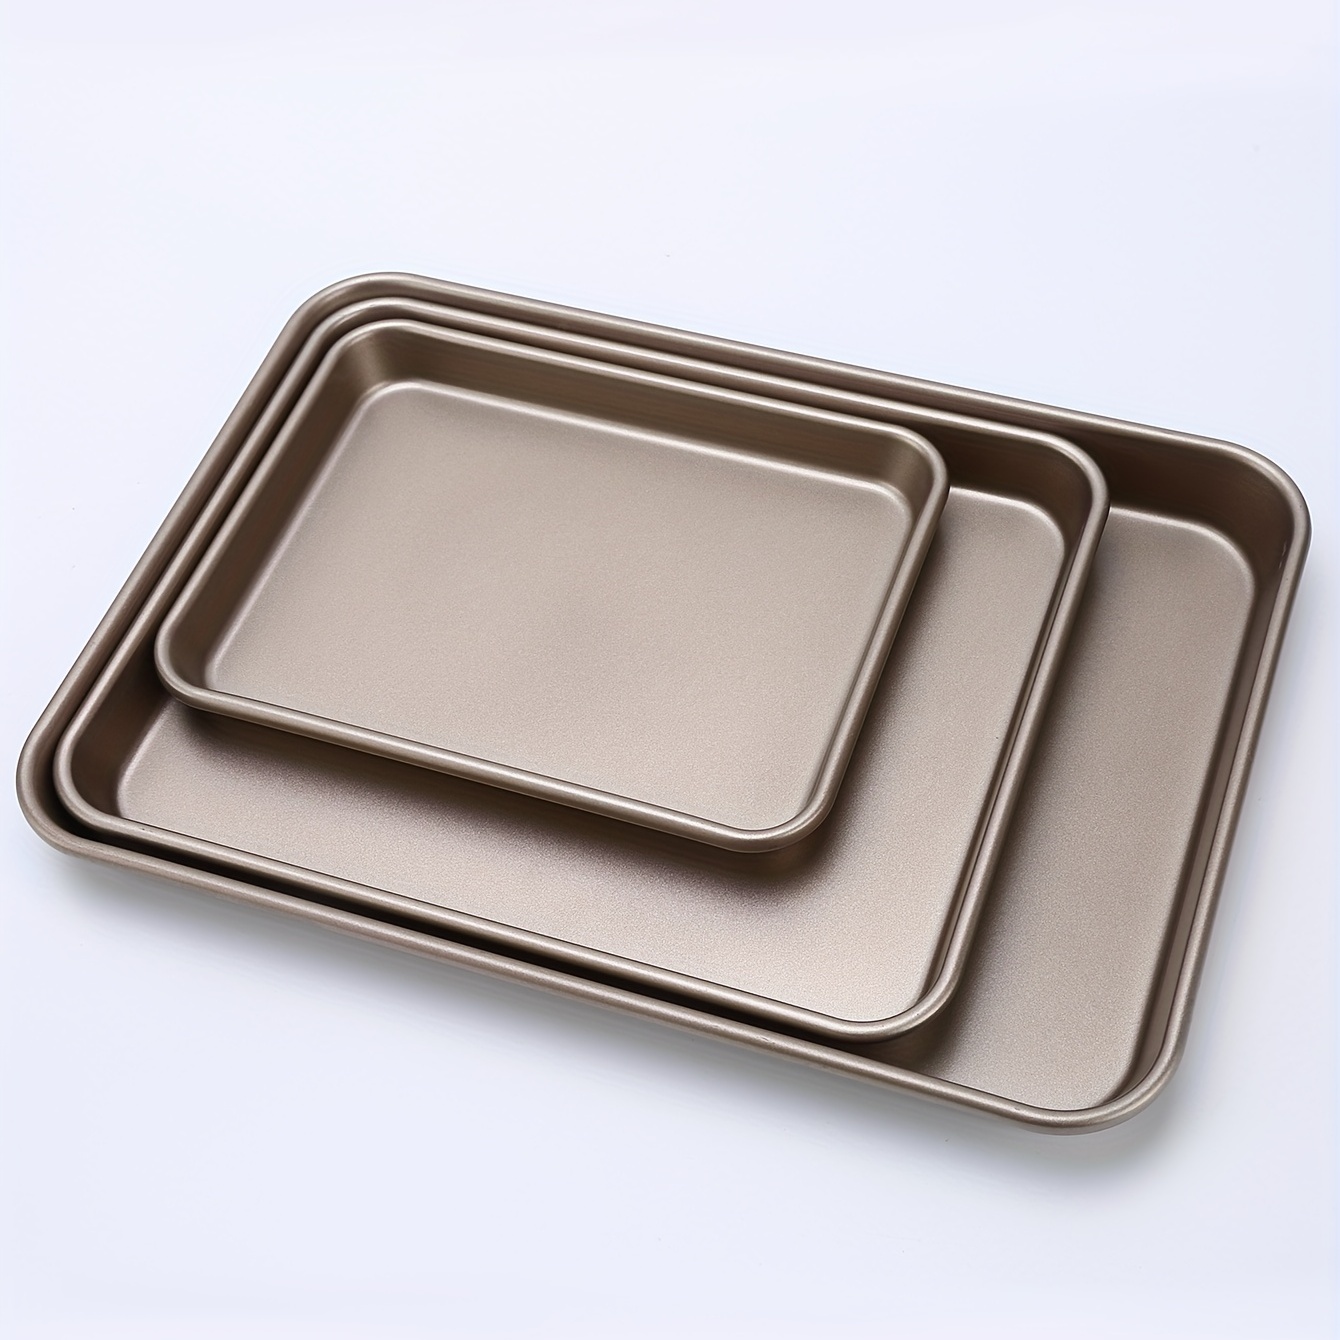 1pc, Carbon Steel Baking Pan, Non-Stick Cookie Sheet, Baking Trays, Oven  Accessories, Baking Tools, Kitchen Gadgets, Kitchen Accessories, Home  Kitchen